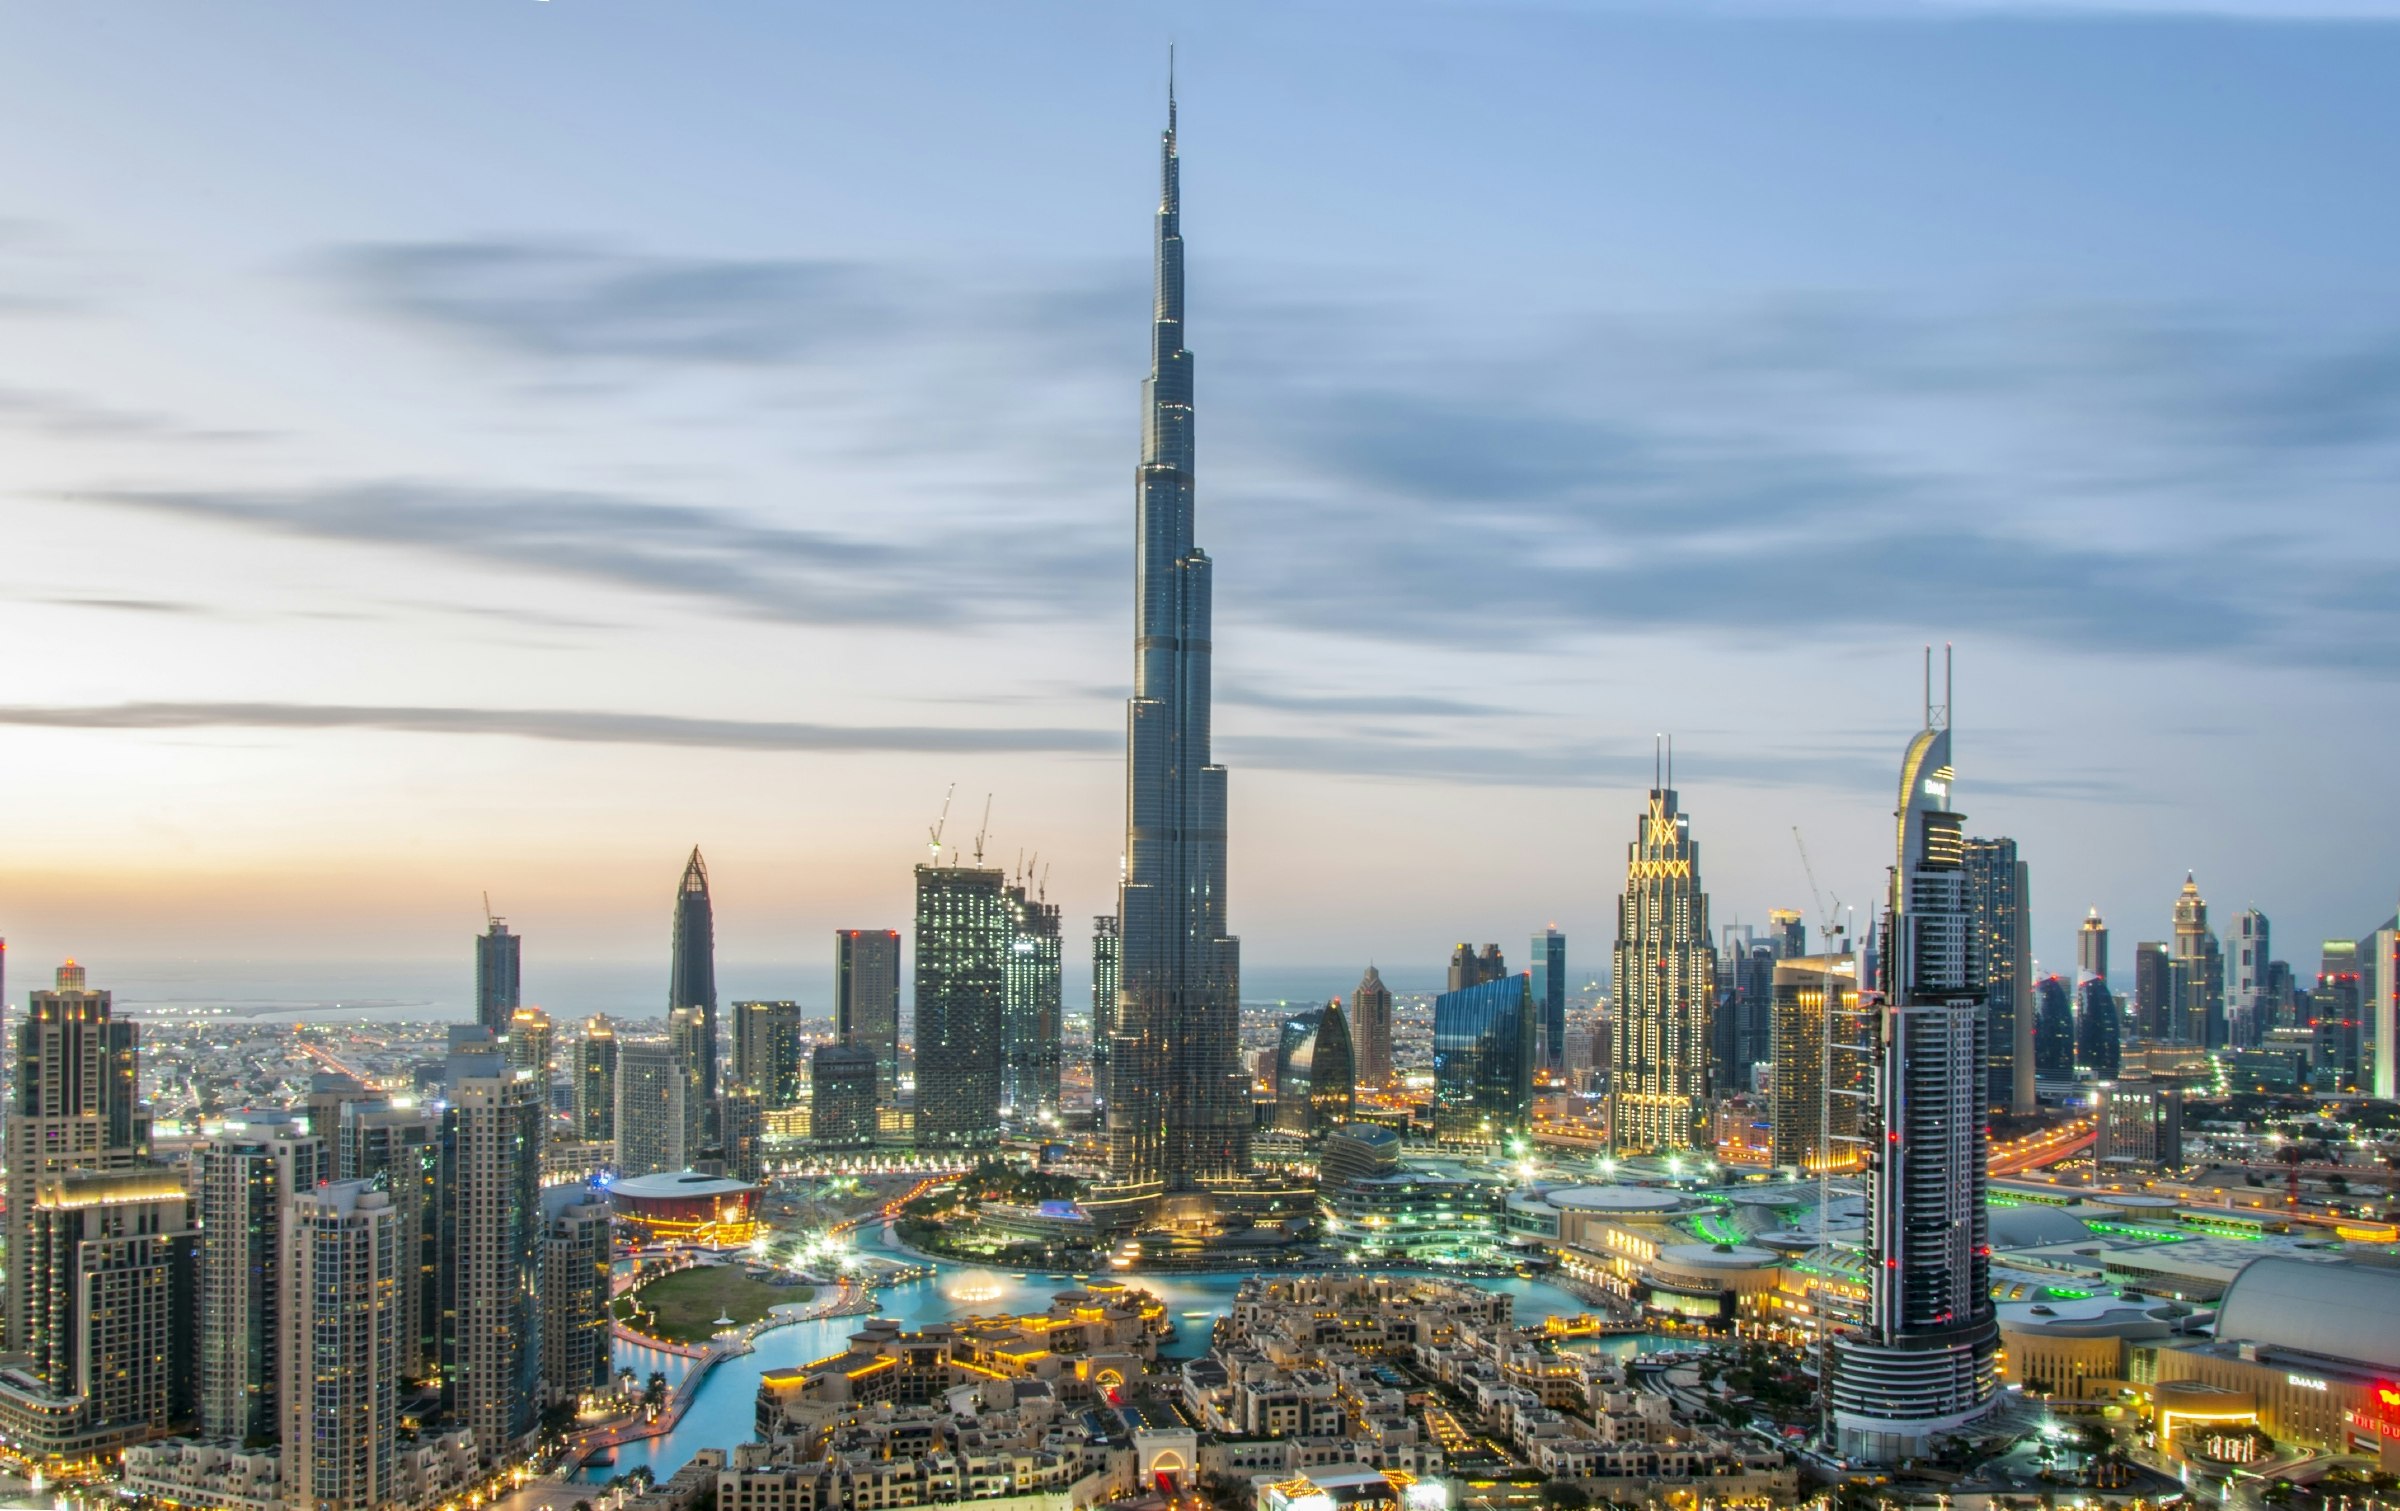 A Dubai Downtown cityscape at sunset, with Burj Khalifa and busy roads in the foreground